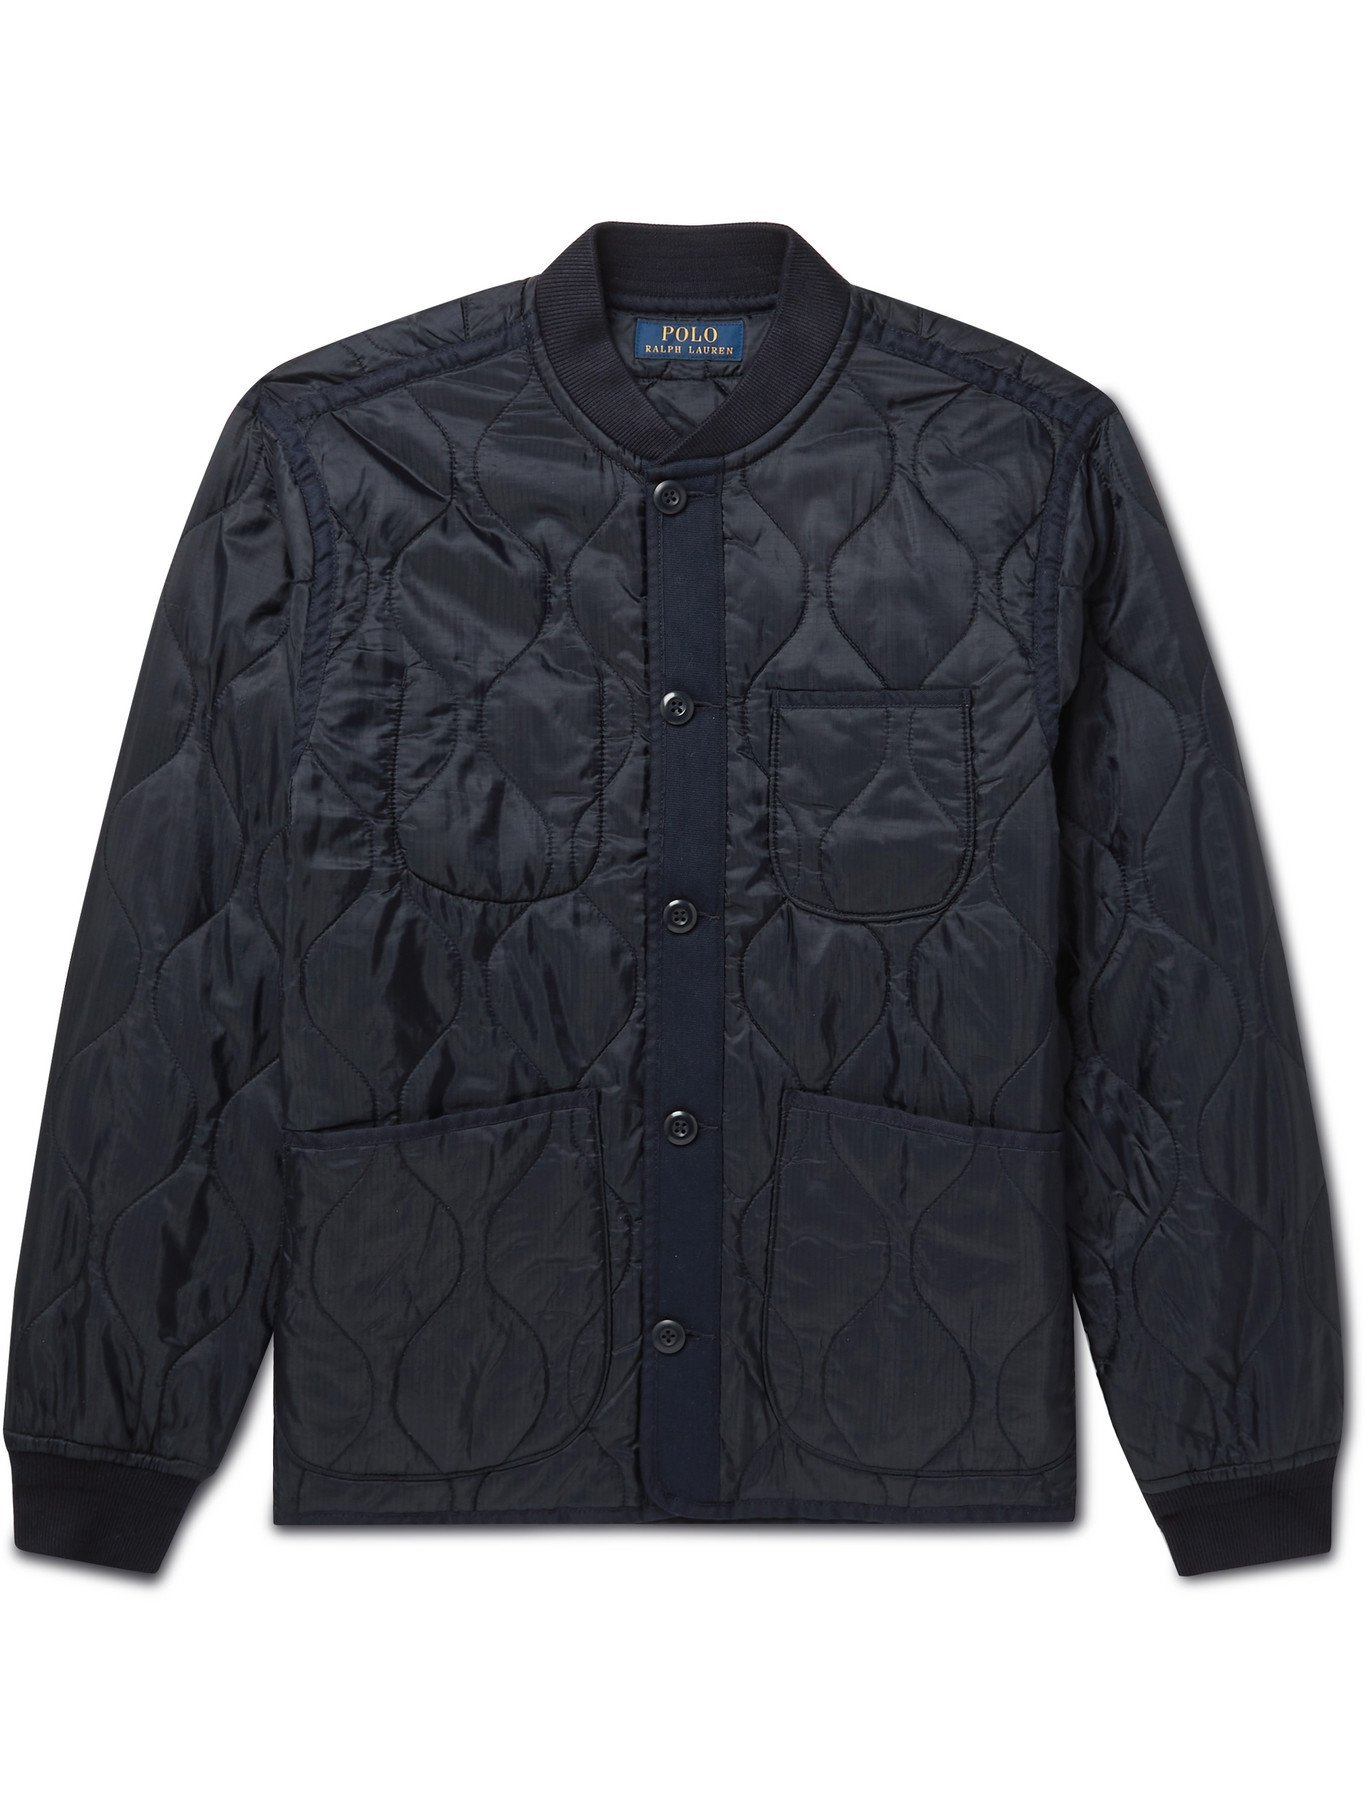 POLO RALPH LAUREN - Quilted Nylon-Ripstop Jacket - Blue - M Polo 